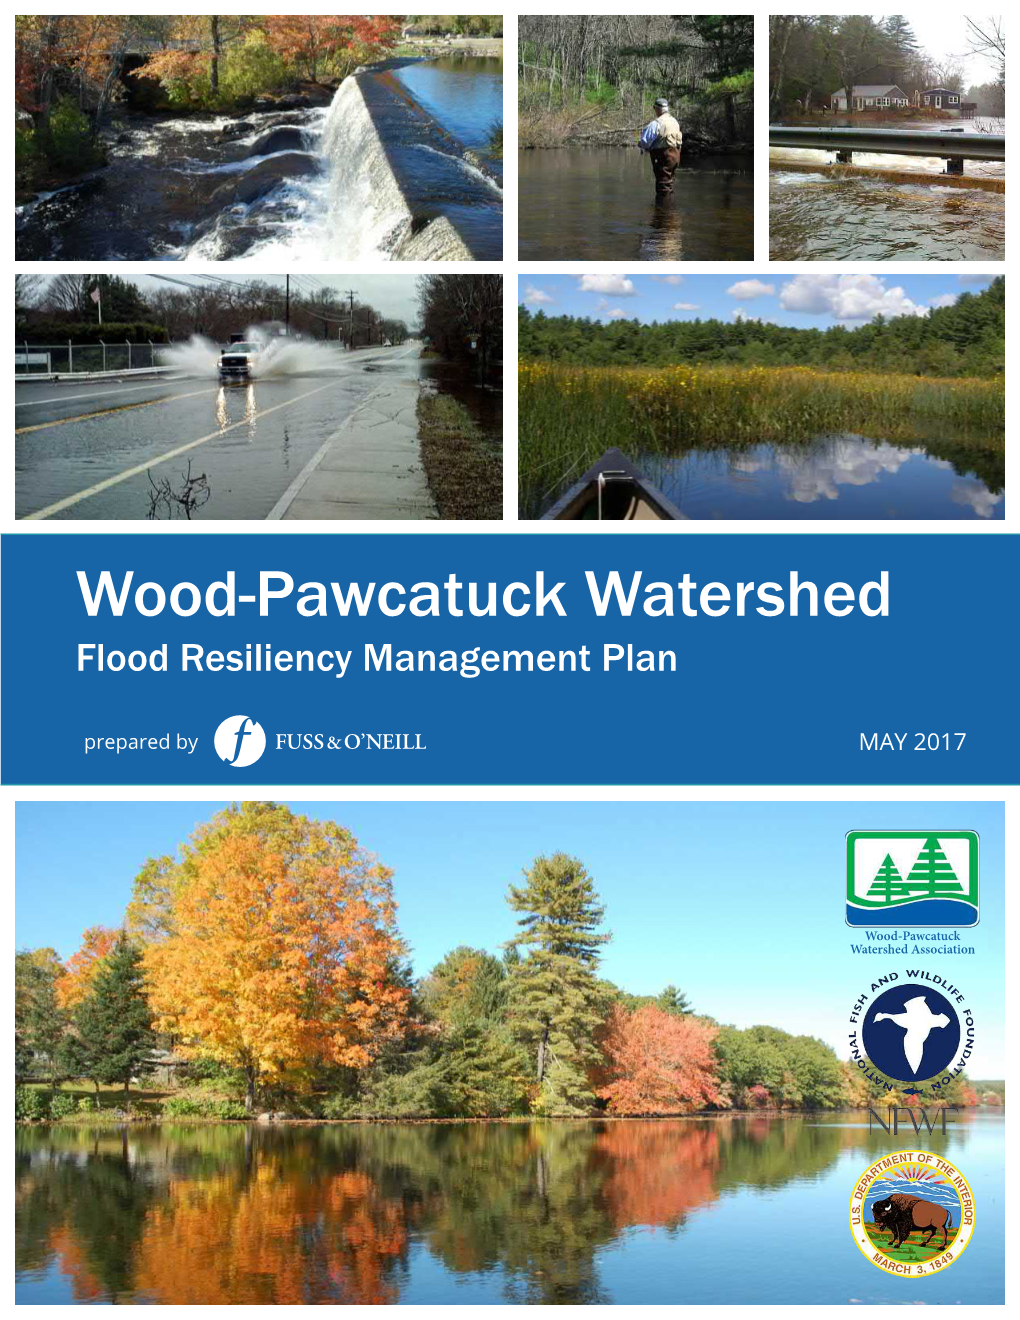 Wood-Pawcatuck Watershed Flood Resiliency Management Plan